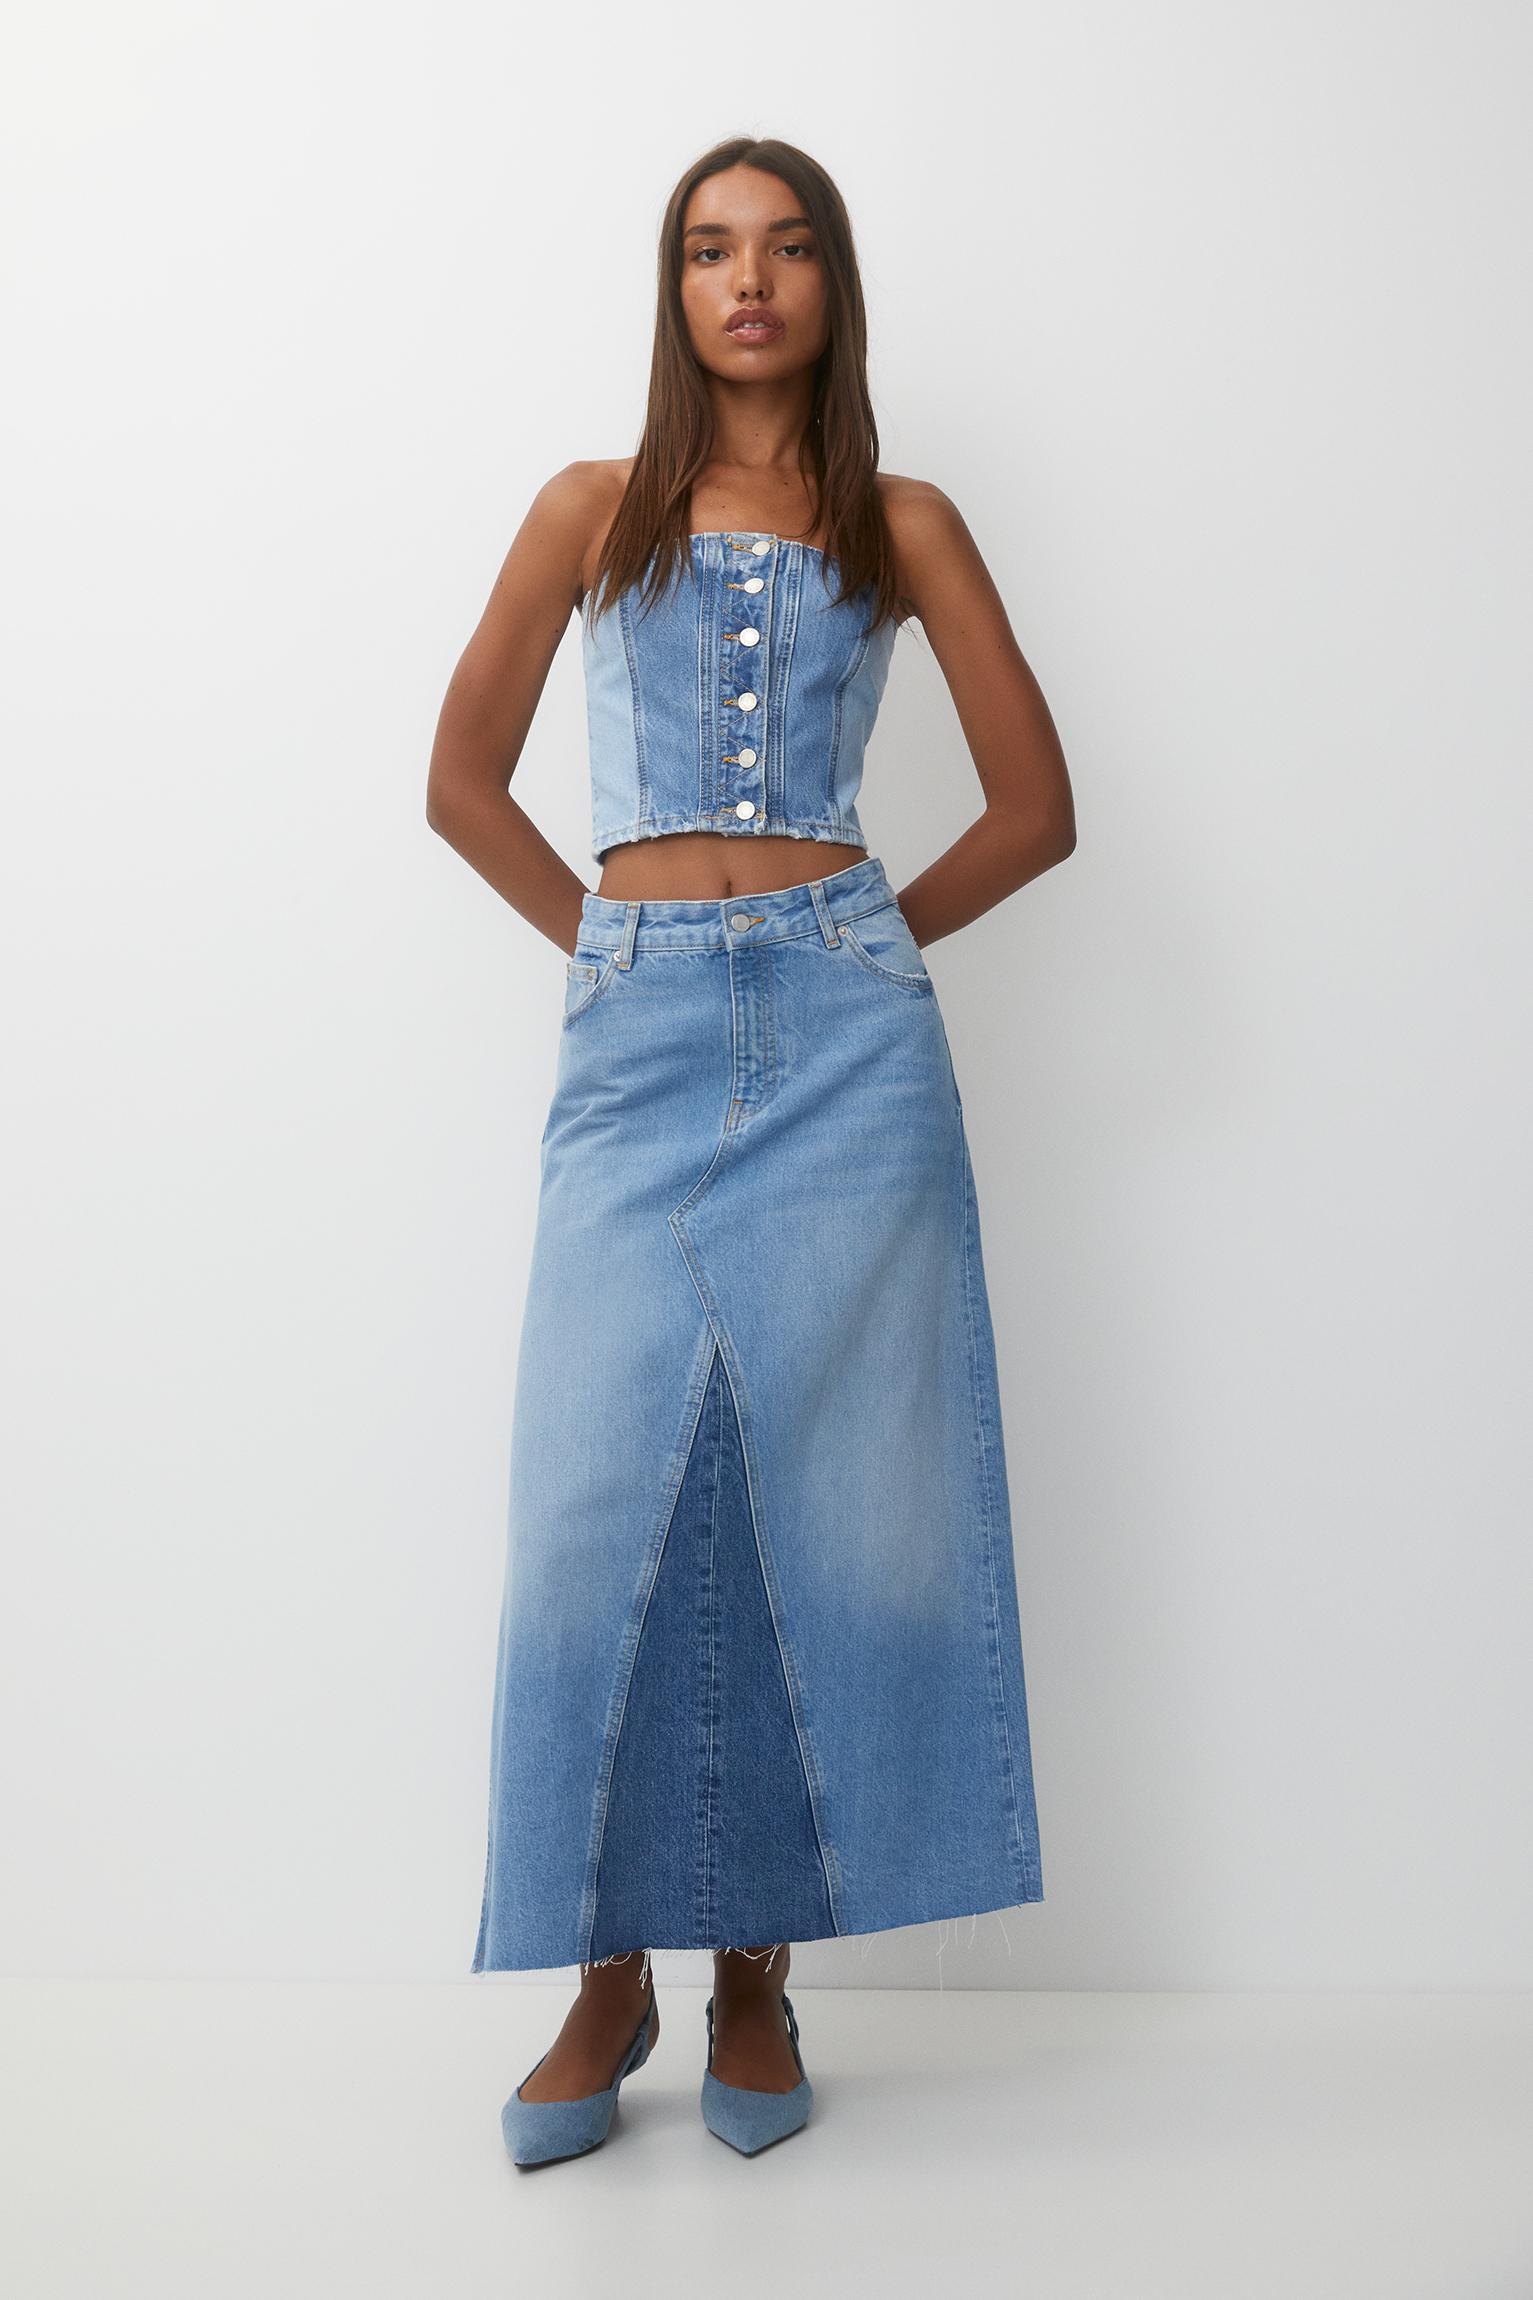 The Patchwork Denim Skirt Is The MustHave Piece For This Summer